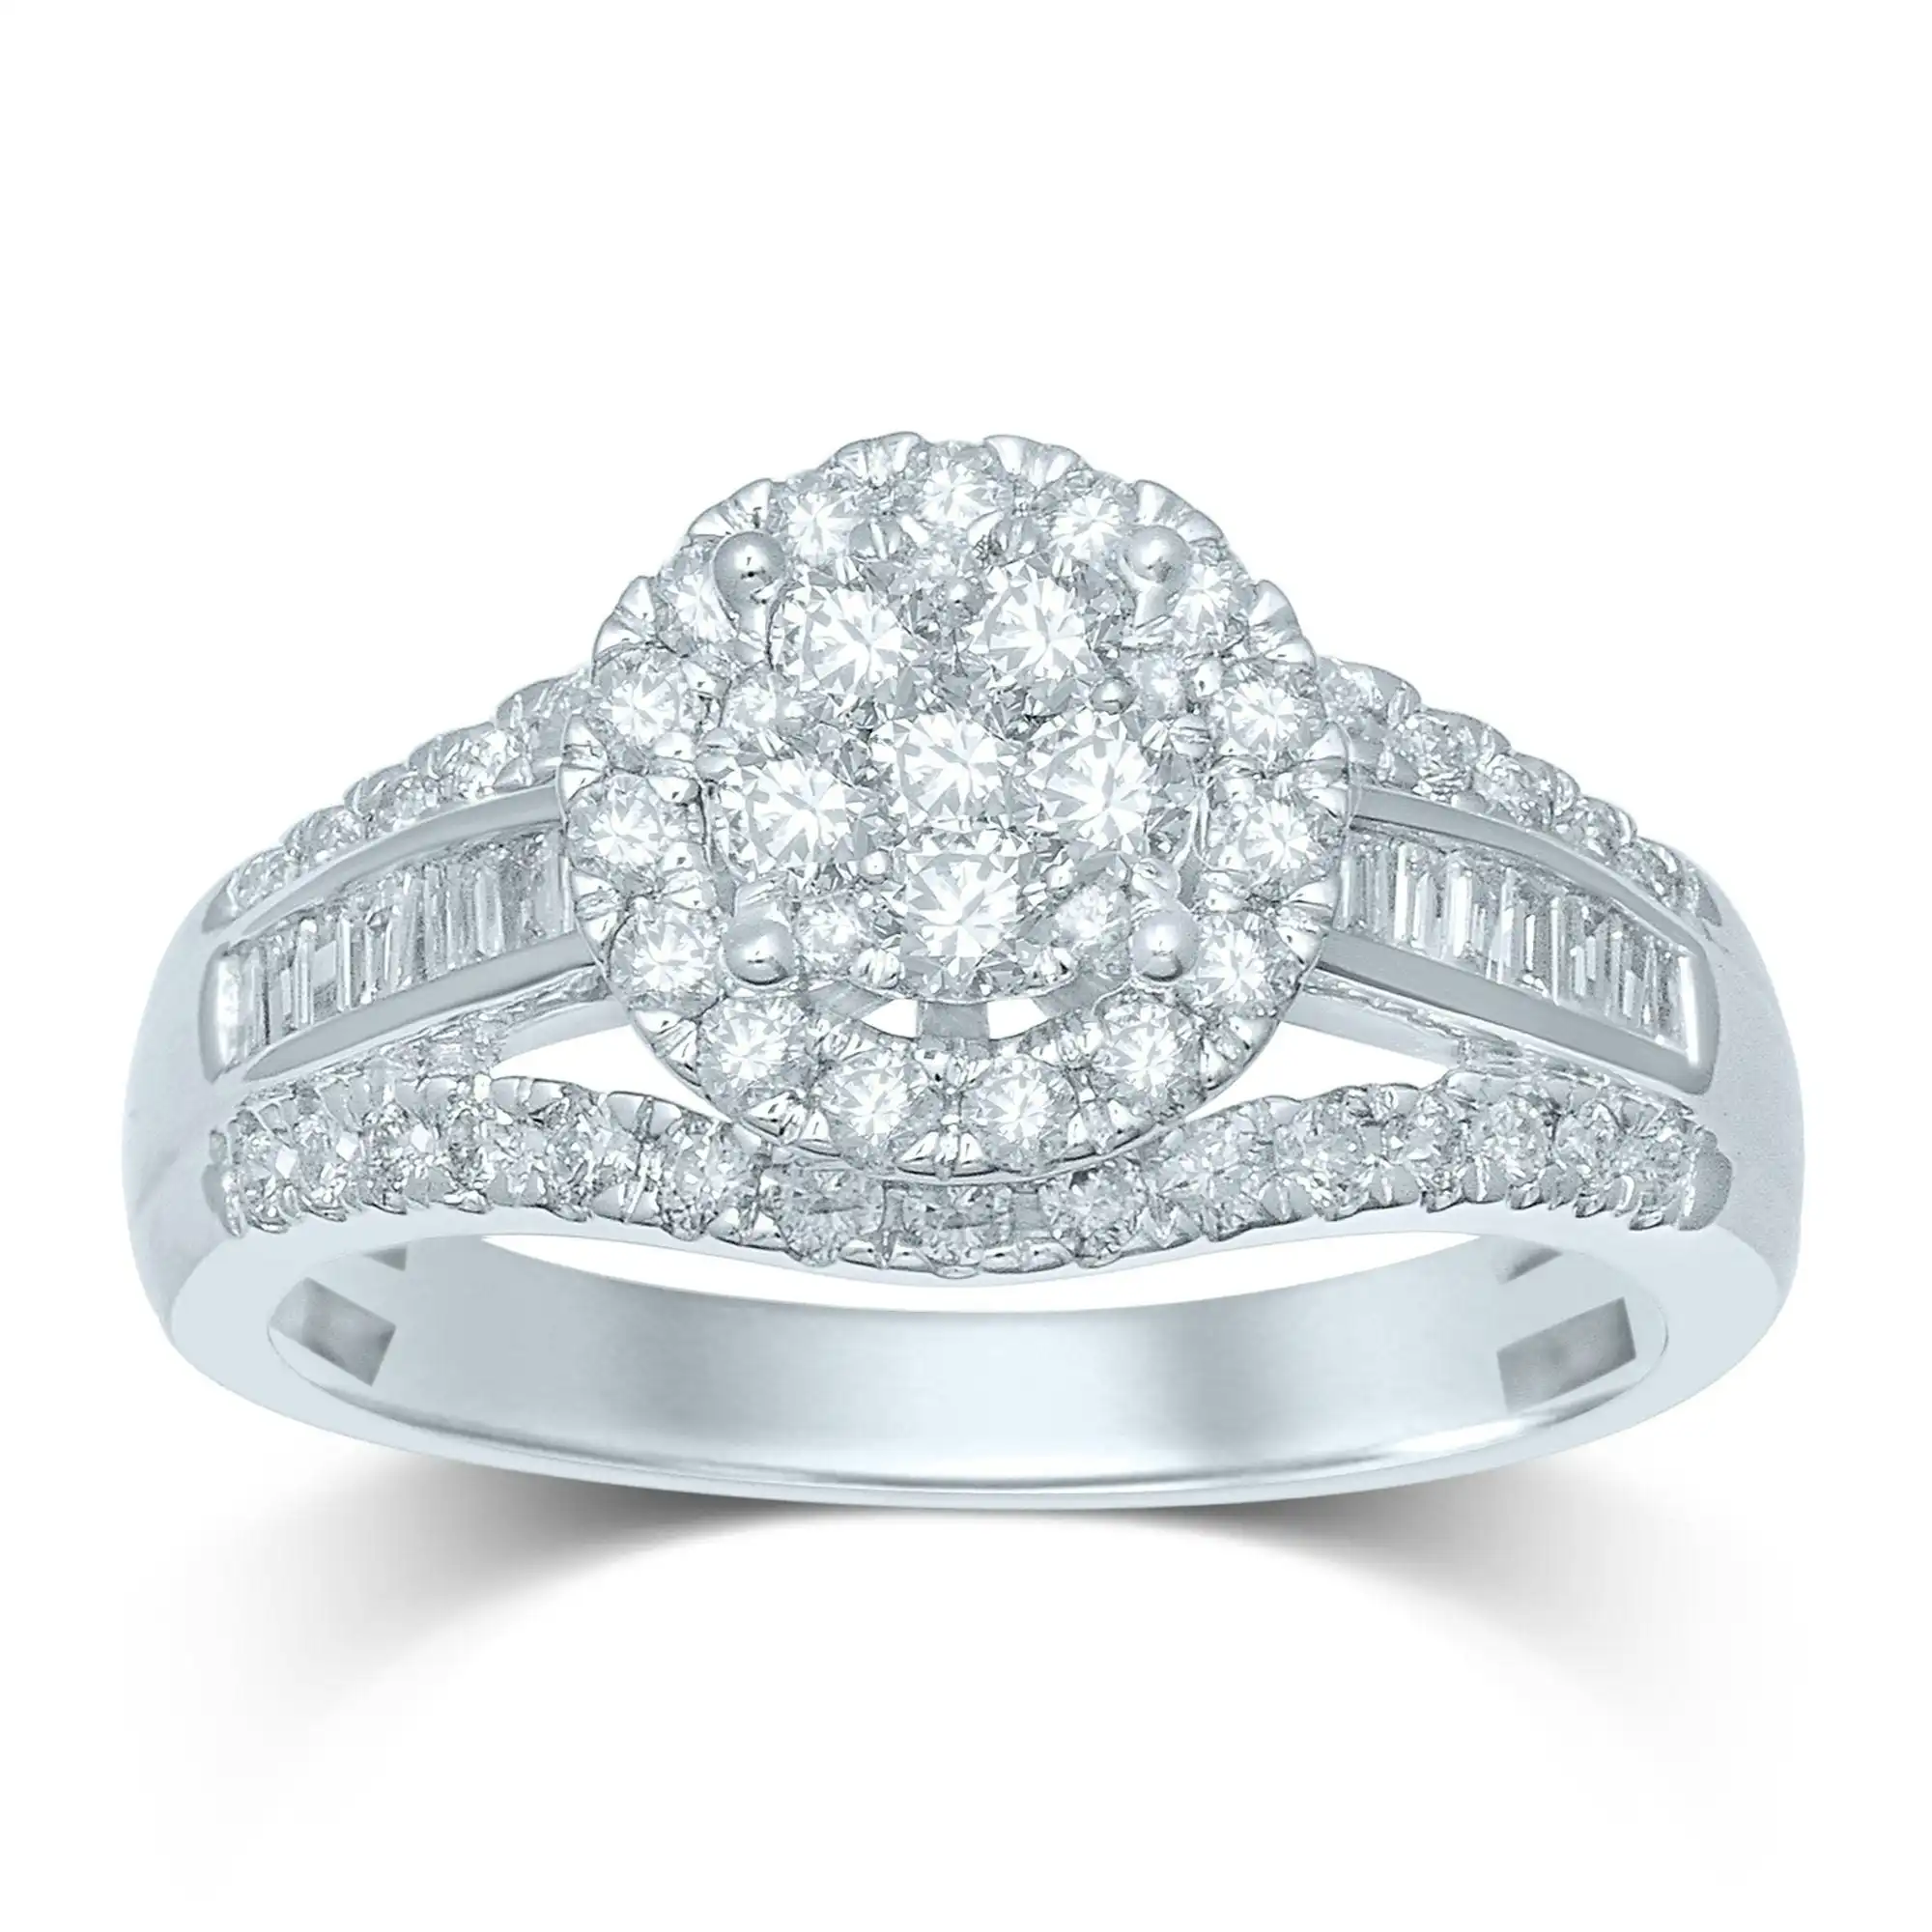 Brilliant Channel Ring with 0.85ct of Diamonds in 9ct White Gold